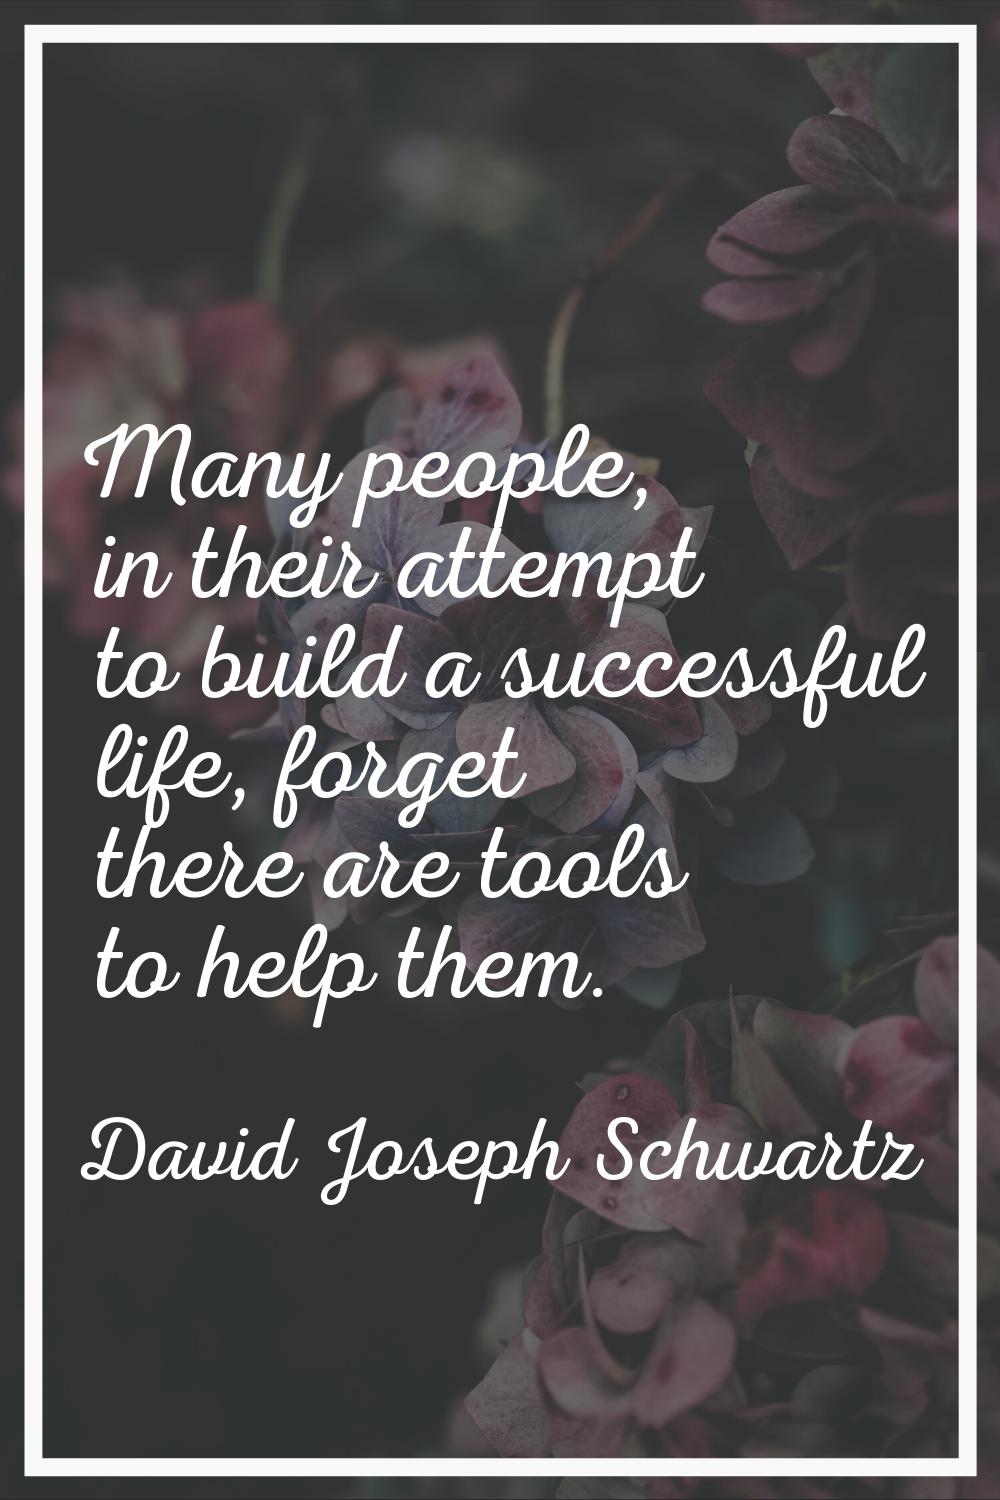 Many people, in their attempt to build a successful life, forget there are tools to help them.